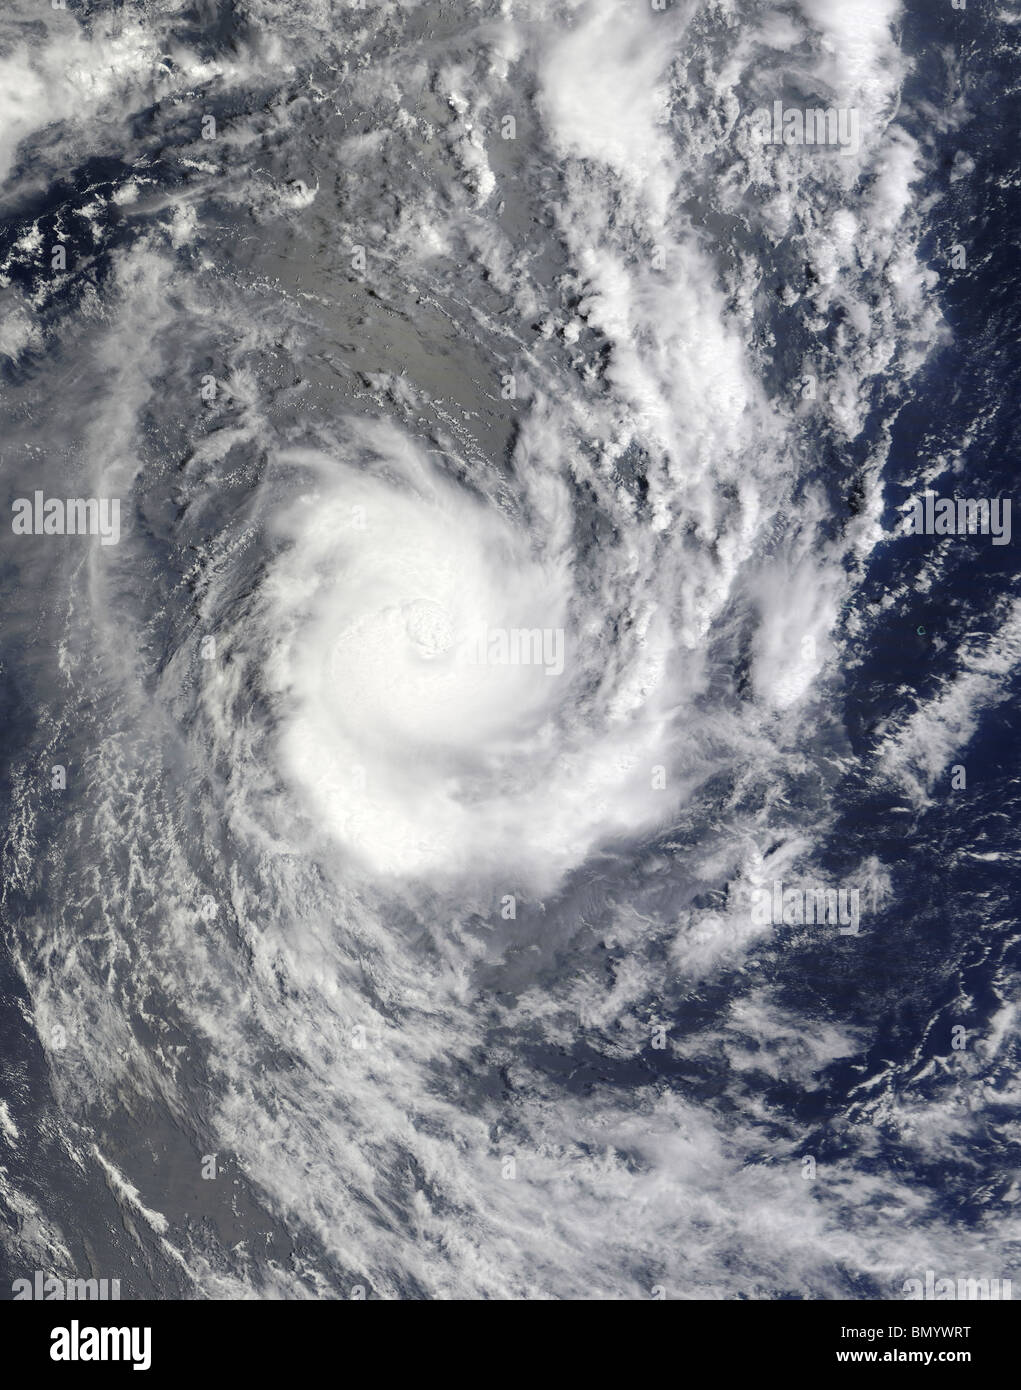 February 9, 2010 - Tropical Cyclone Pat over the Southern Pacific Ocean between Bora Bora and Pago Pago. Stock Photo